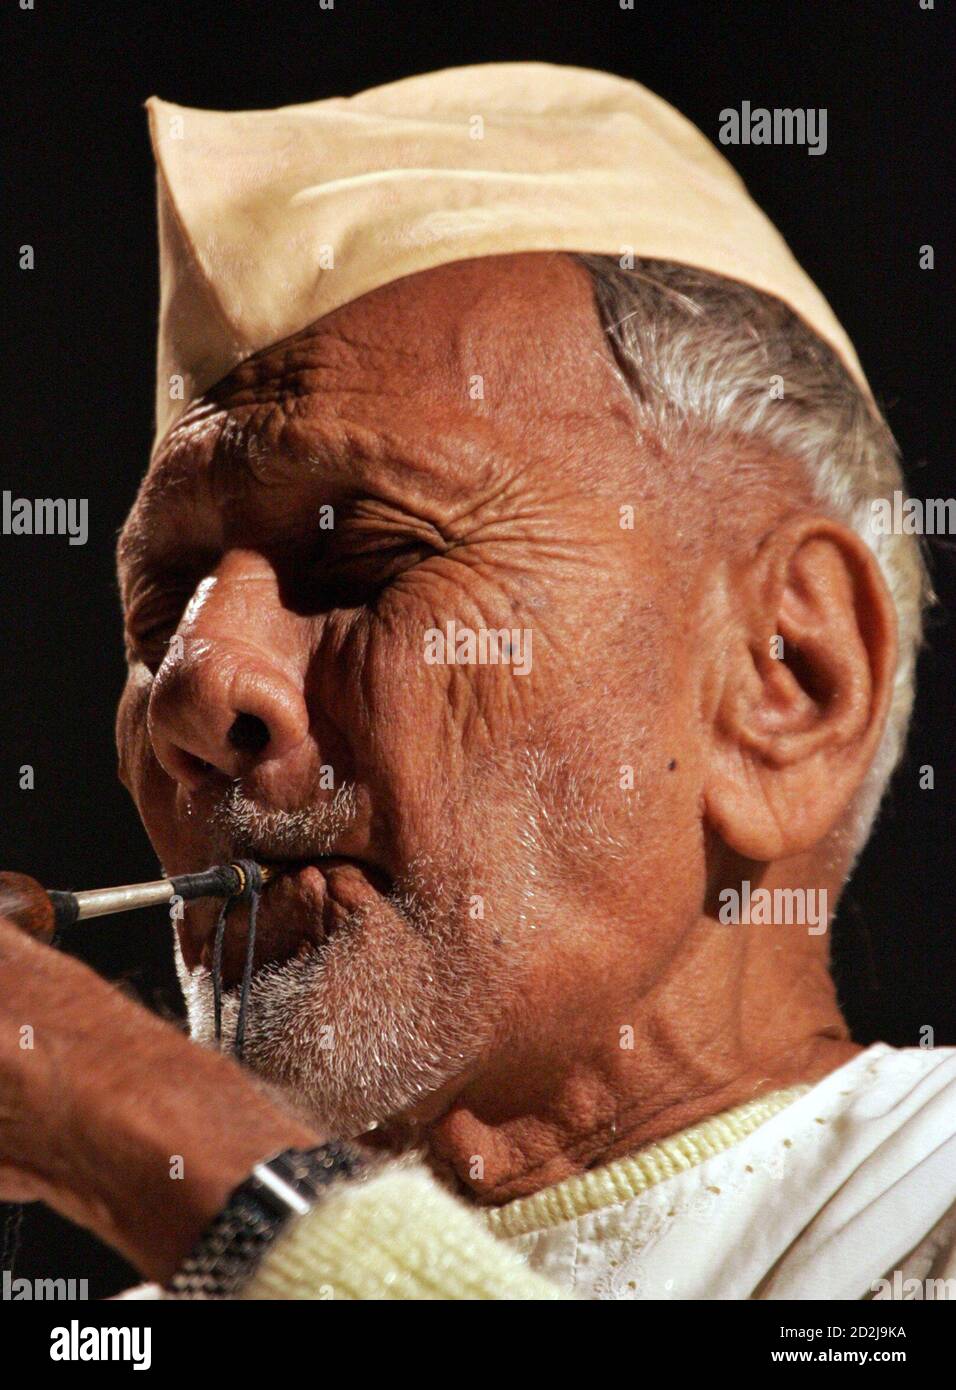 89-year-old Indian Clarinettist Ustad Bismillah Khan performs during a show in Srinagar, India September 12, 2005. Khan, the recipient of Bharat Ratna (India's highest civilian award), is presently in Srinagar and performed during an hour-long show. REUTERS/Fayaz Kabli  FK/JJ Stock Photo